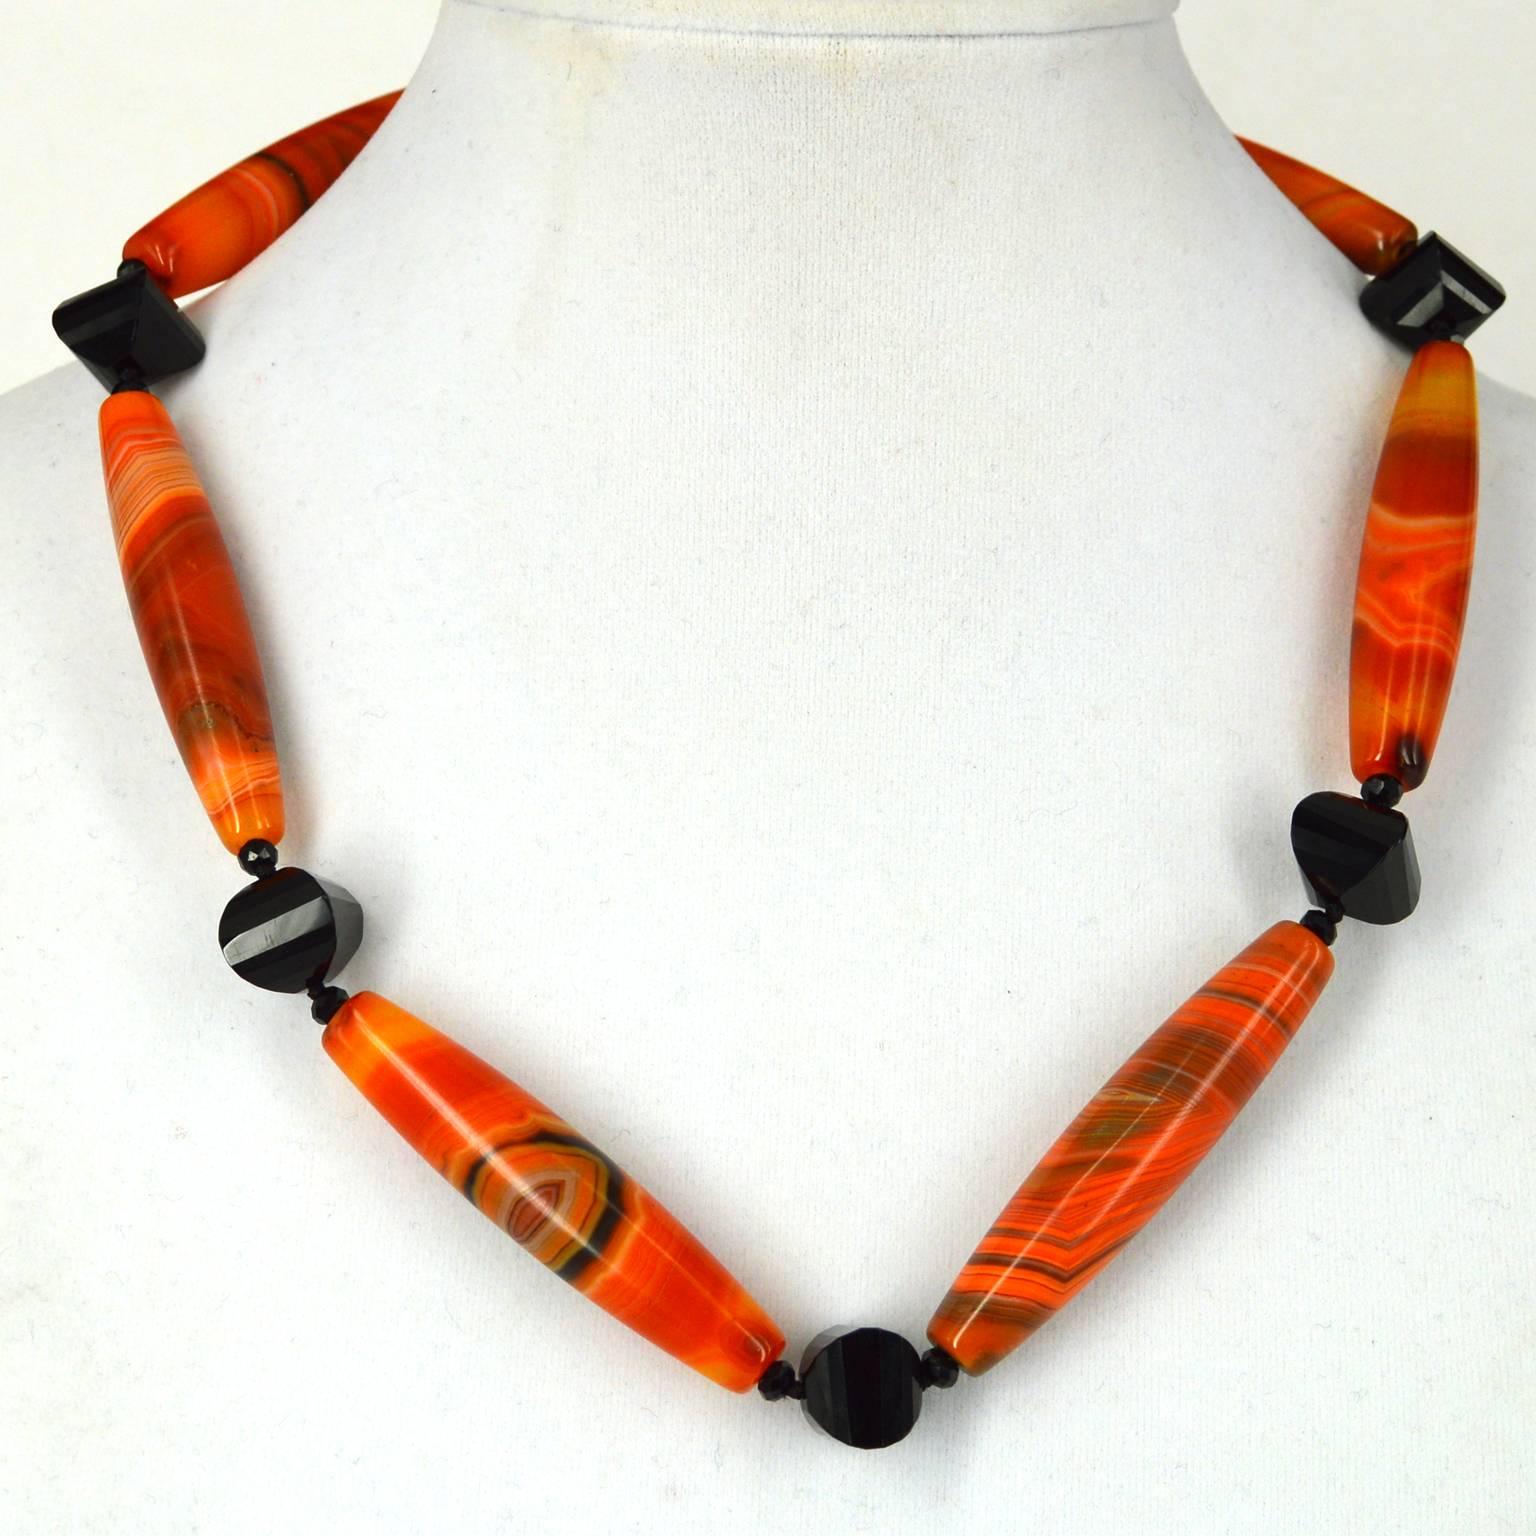 Exceptional quality Orange Banded Agate long olive 55x12mm beads with 12x12mm faceted lantern shaped Onyx beads, finished with a 13mm Gold Plated Sterling Silver bolt ring Clasp.
Finished necklace measures 51cm
Custom alterations available